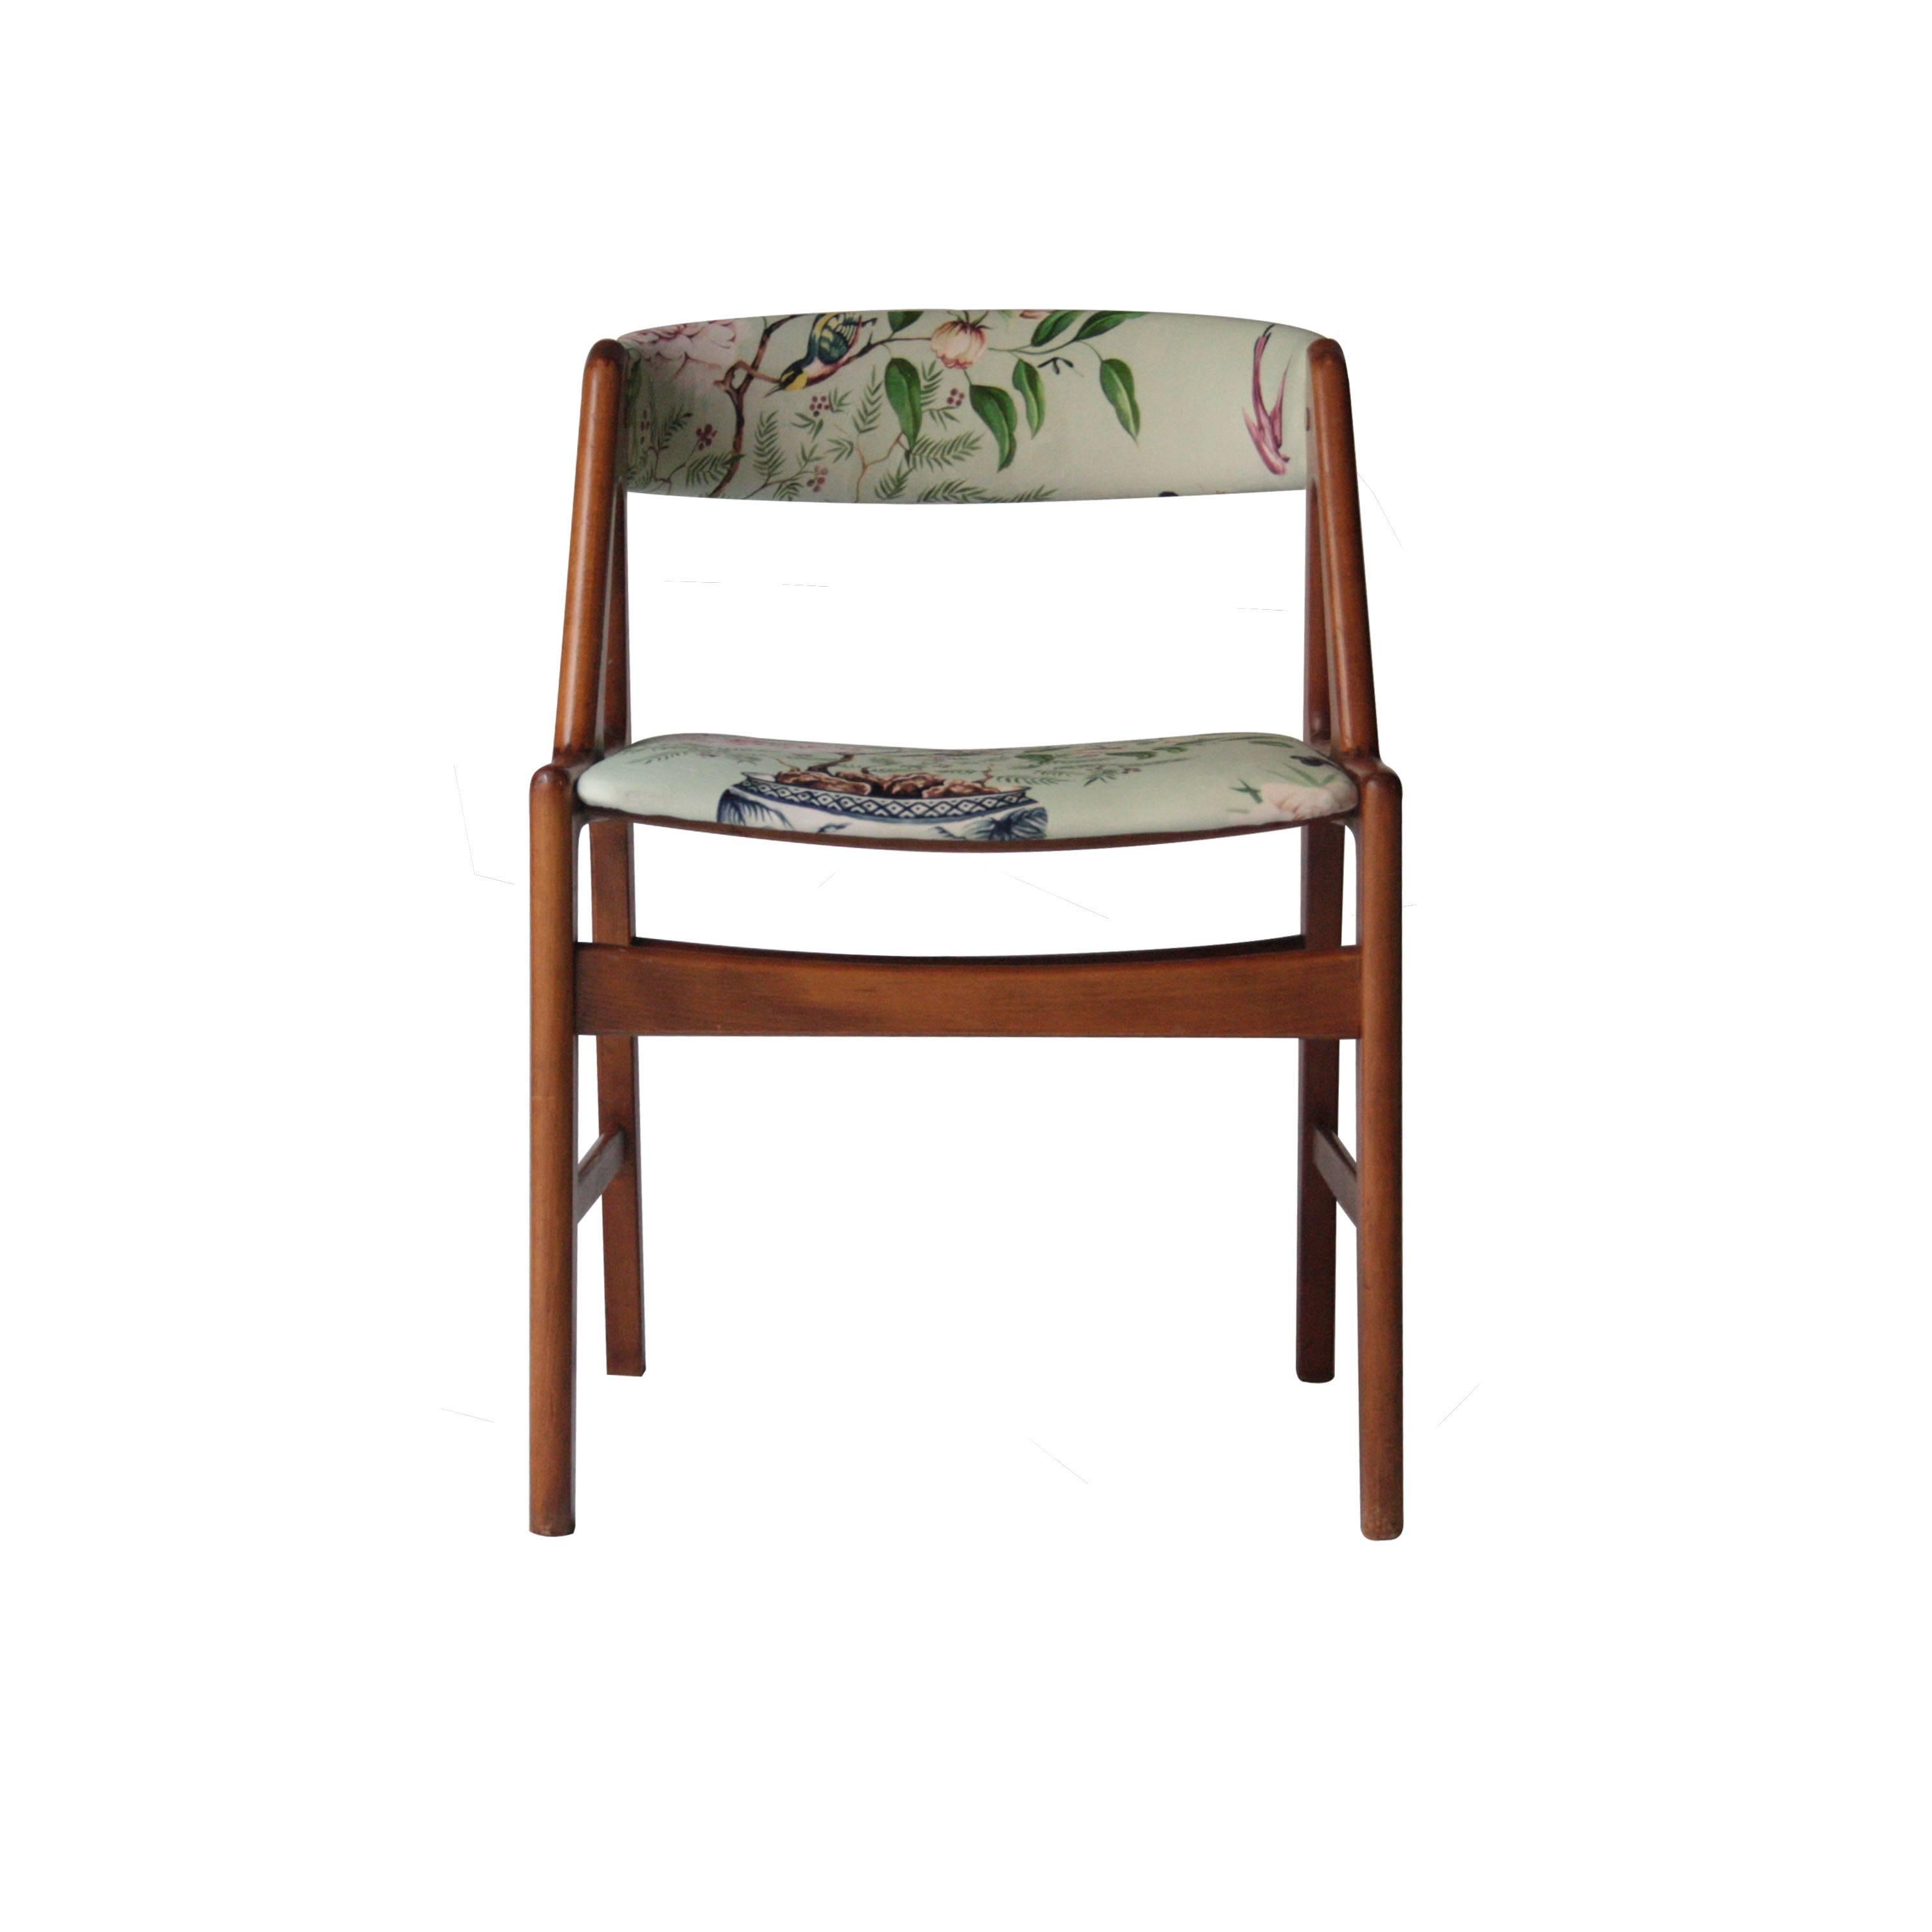 Set of four chairs model 31 designed by Kai Kristiansen. Structure made of teak with upholstered curved back and seat. Floral printed velvet upholstery.
 